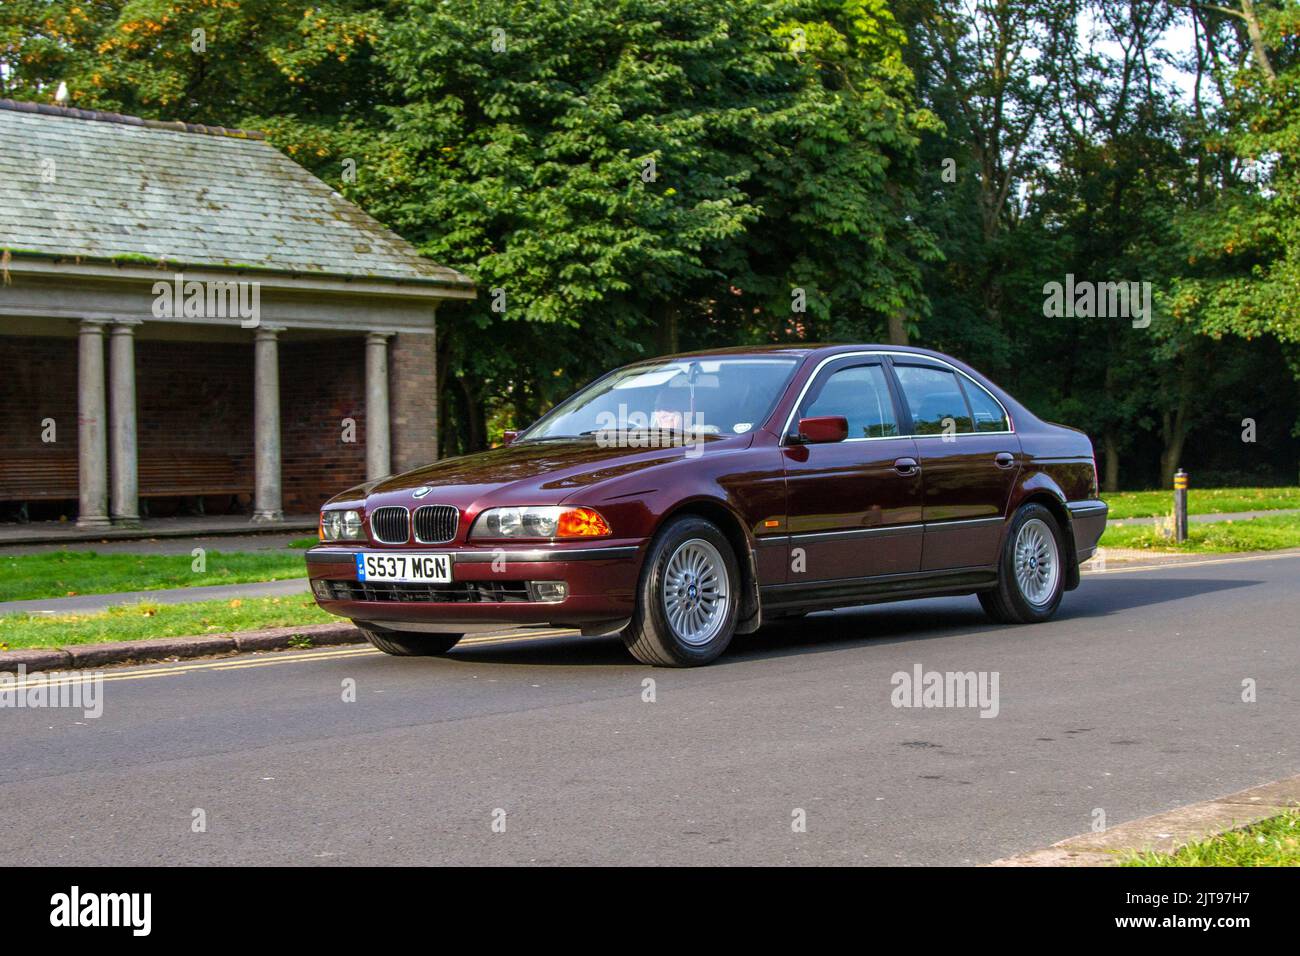 1998 90s N90 Red BMW 523I 2500cc benzina berlina; arrivo all'annuale Stanley Park Classic Car Show nei Giardini Italiani. Stanley Park Classics Yesteryear Motor Show Hosted by Blackpool Vintage Vehicle Preservation Group, UK. Foto Stock